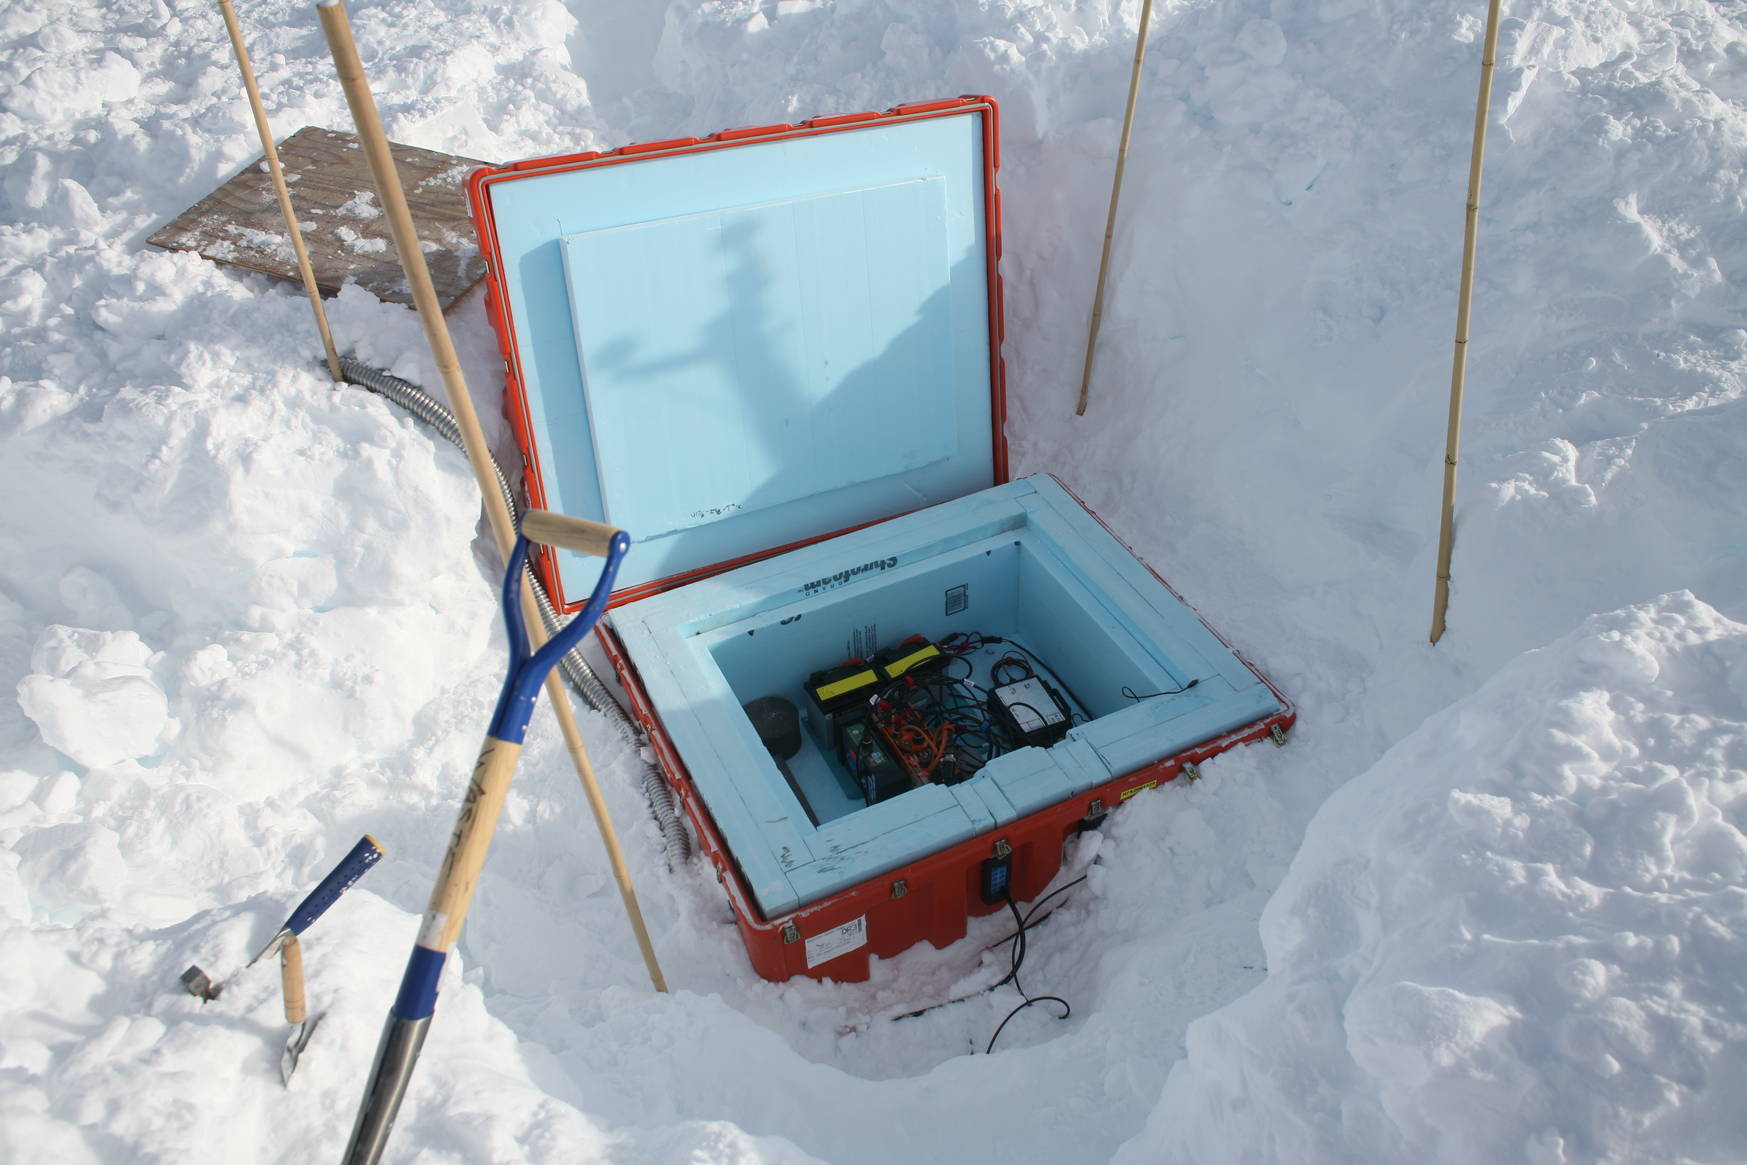 The equipment under ground is throroughly protected and insulated.